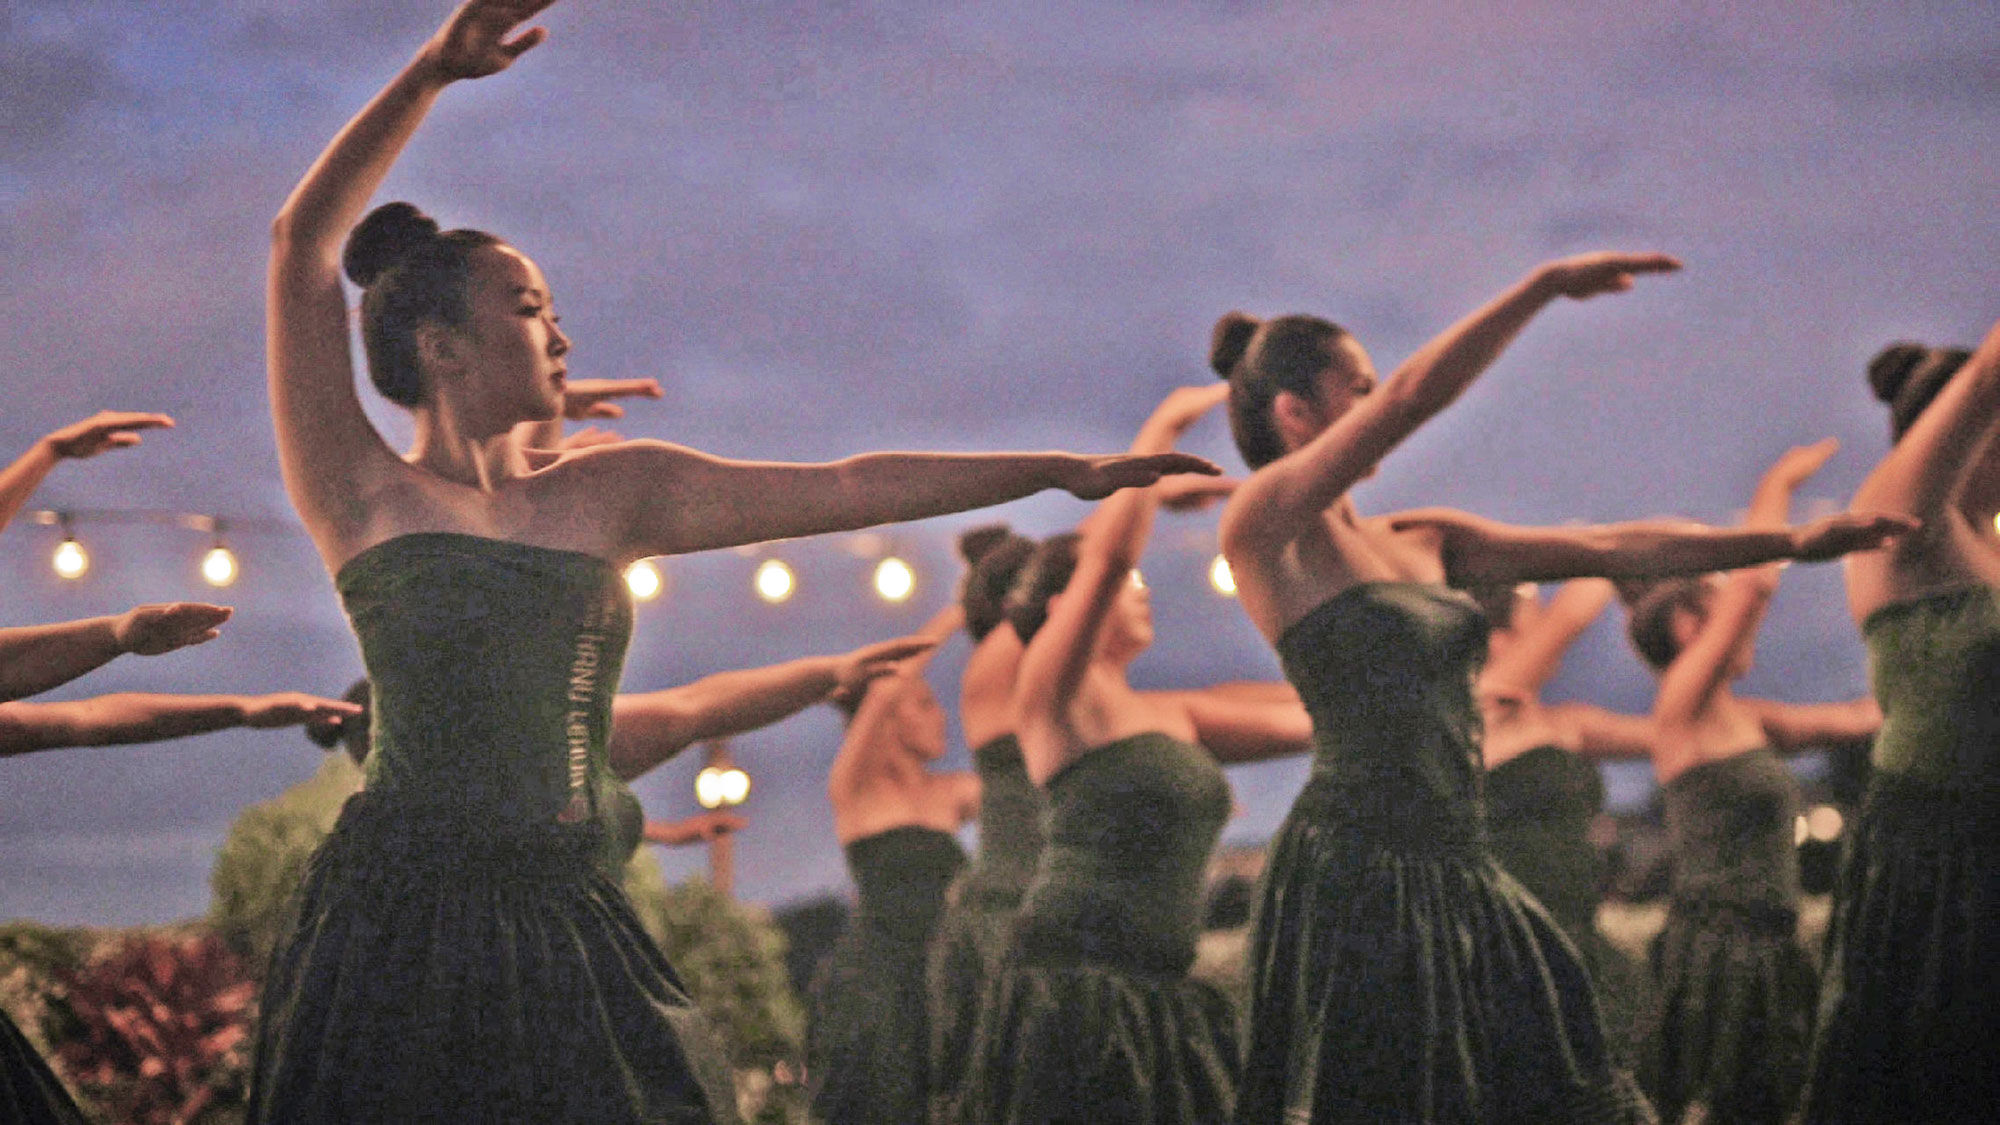 Dancers practice as part of the Four Seasons Resort Maui's "Behind the Scenes of Hula" experience.